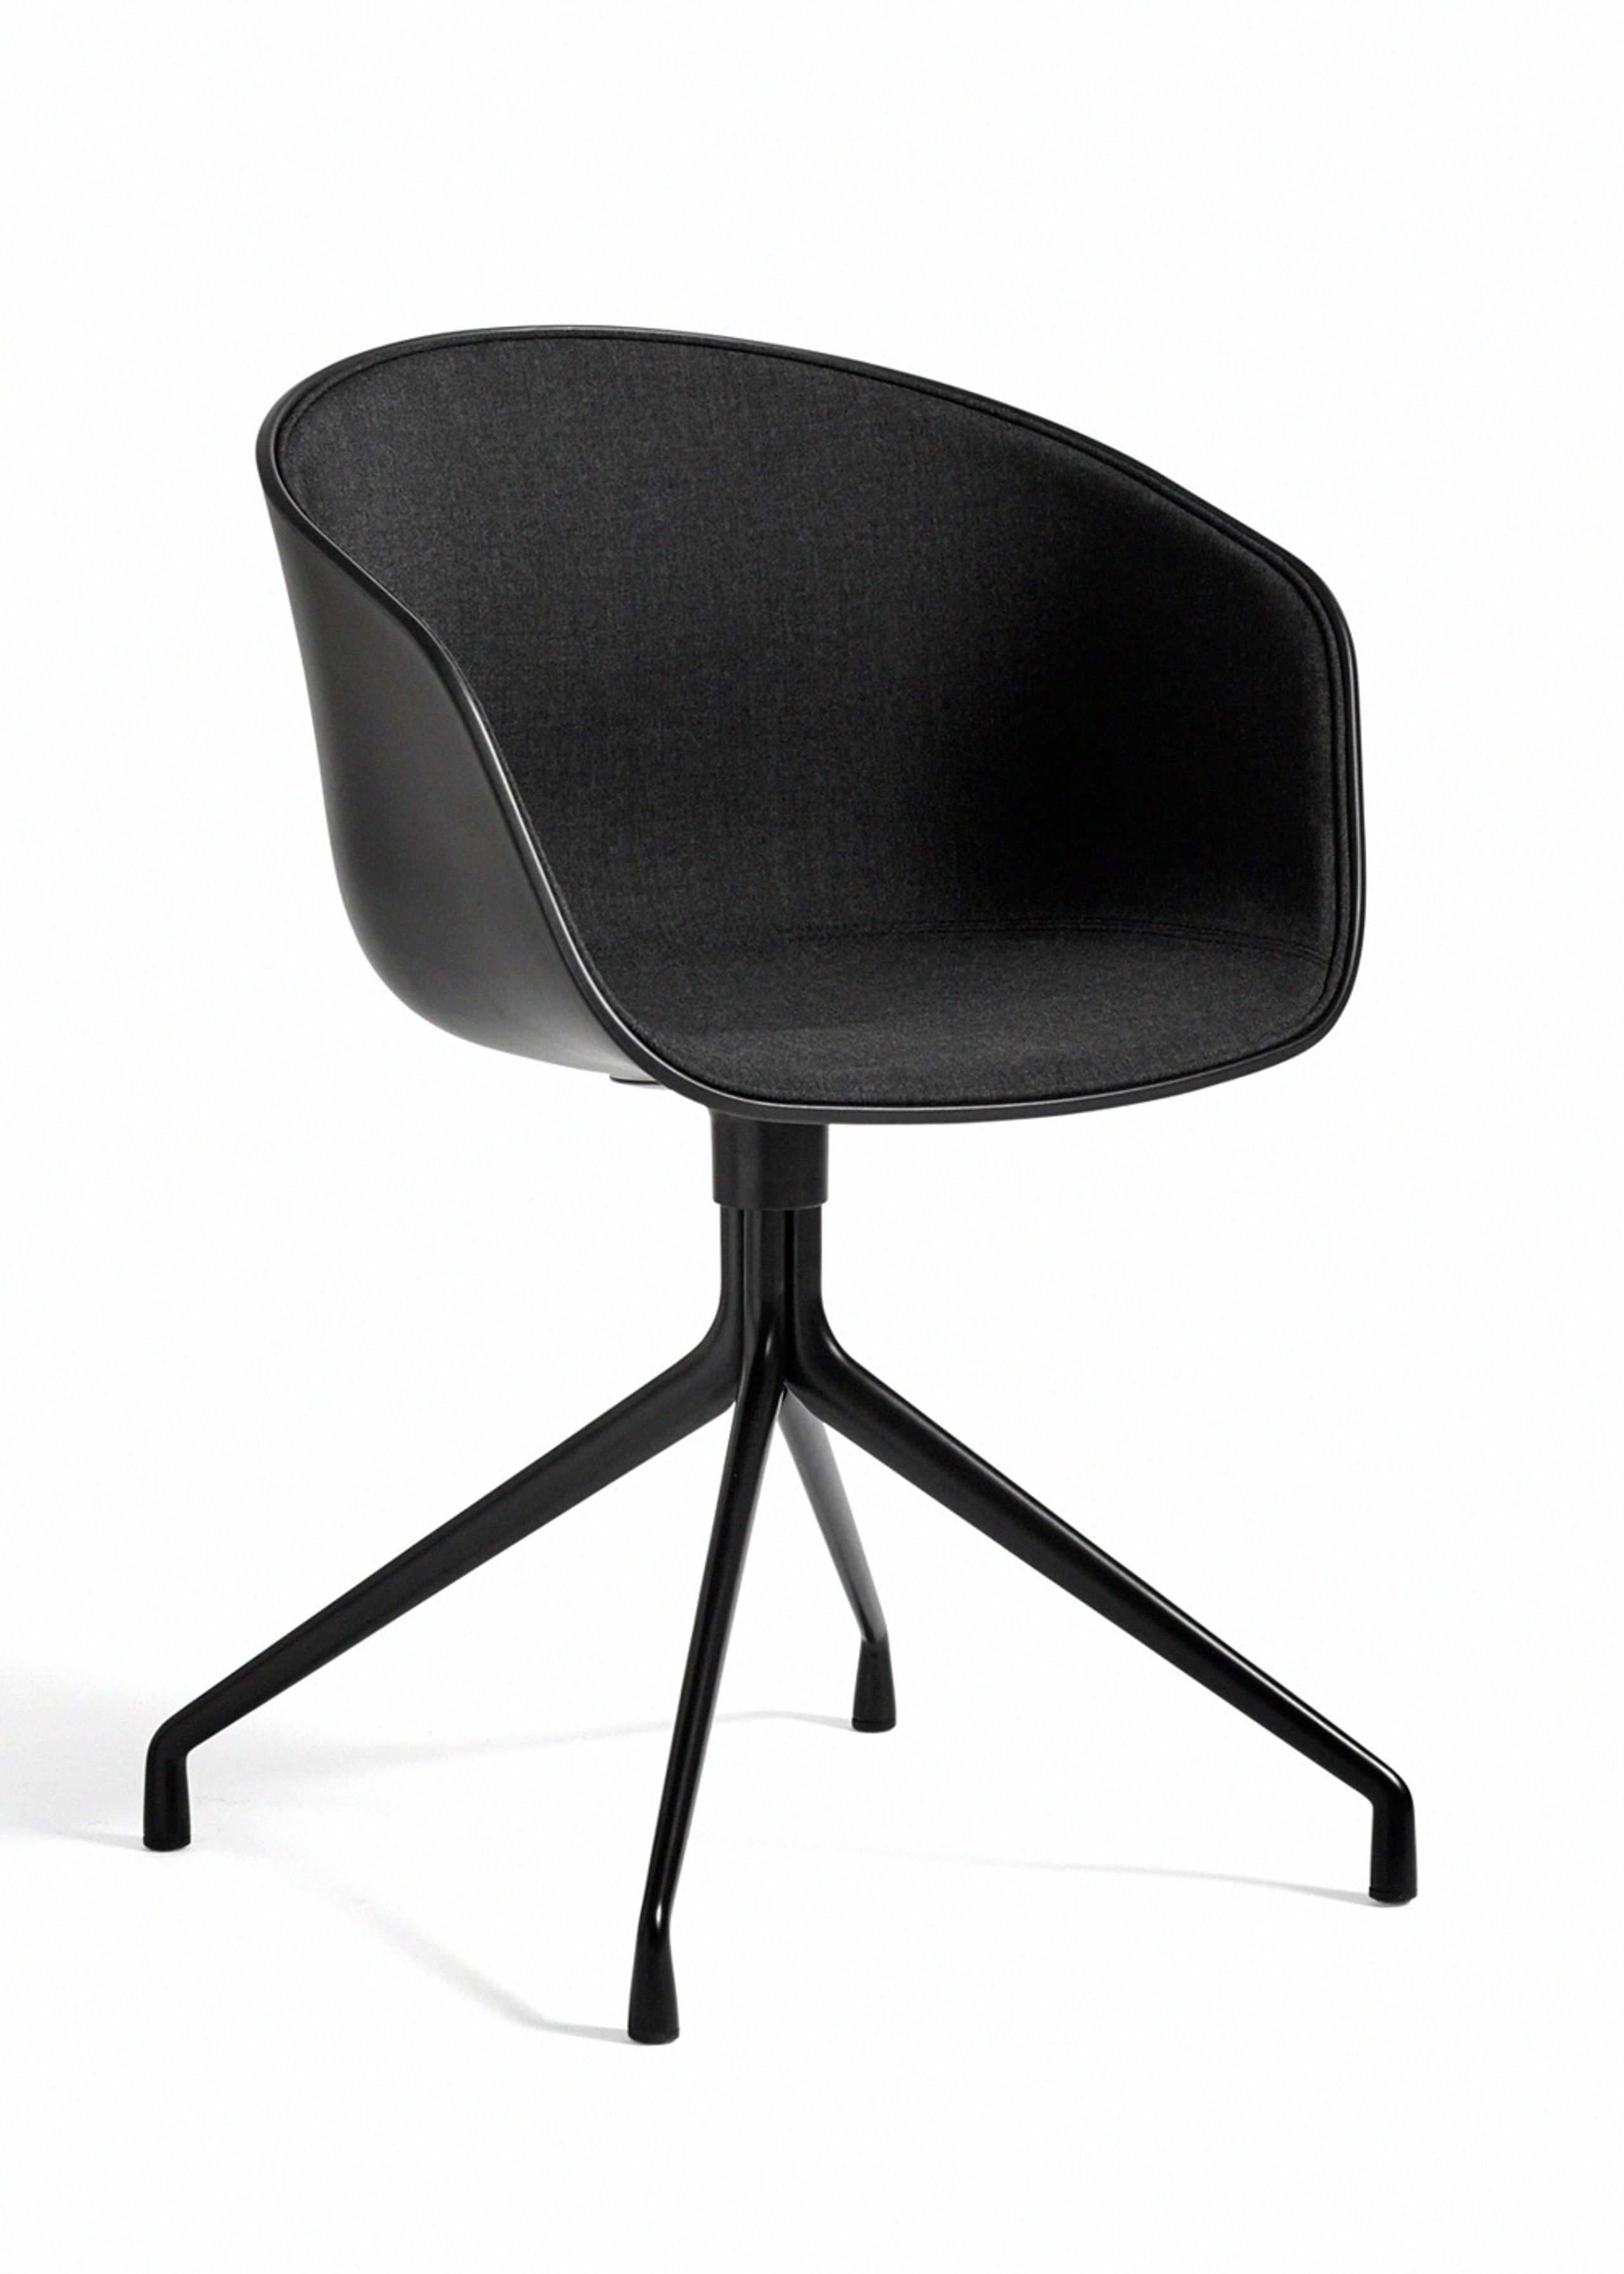 HAY - Stol - AAC 20 / Front Upholstery - Seat: Black & Remix 183